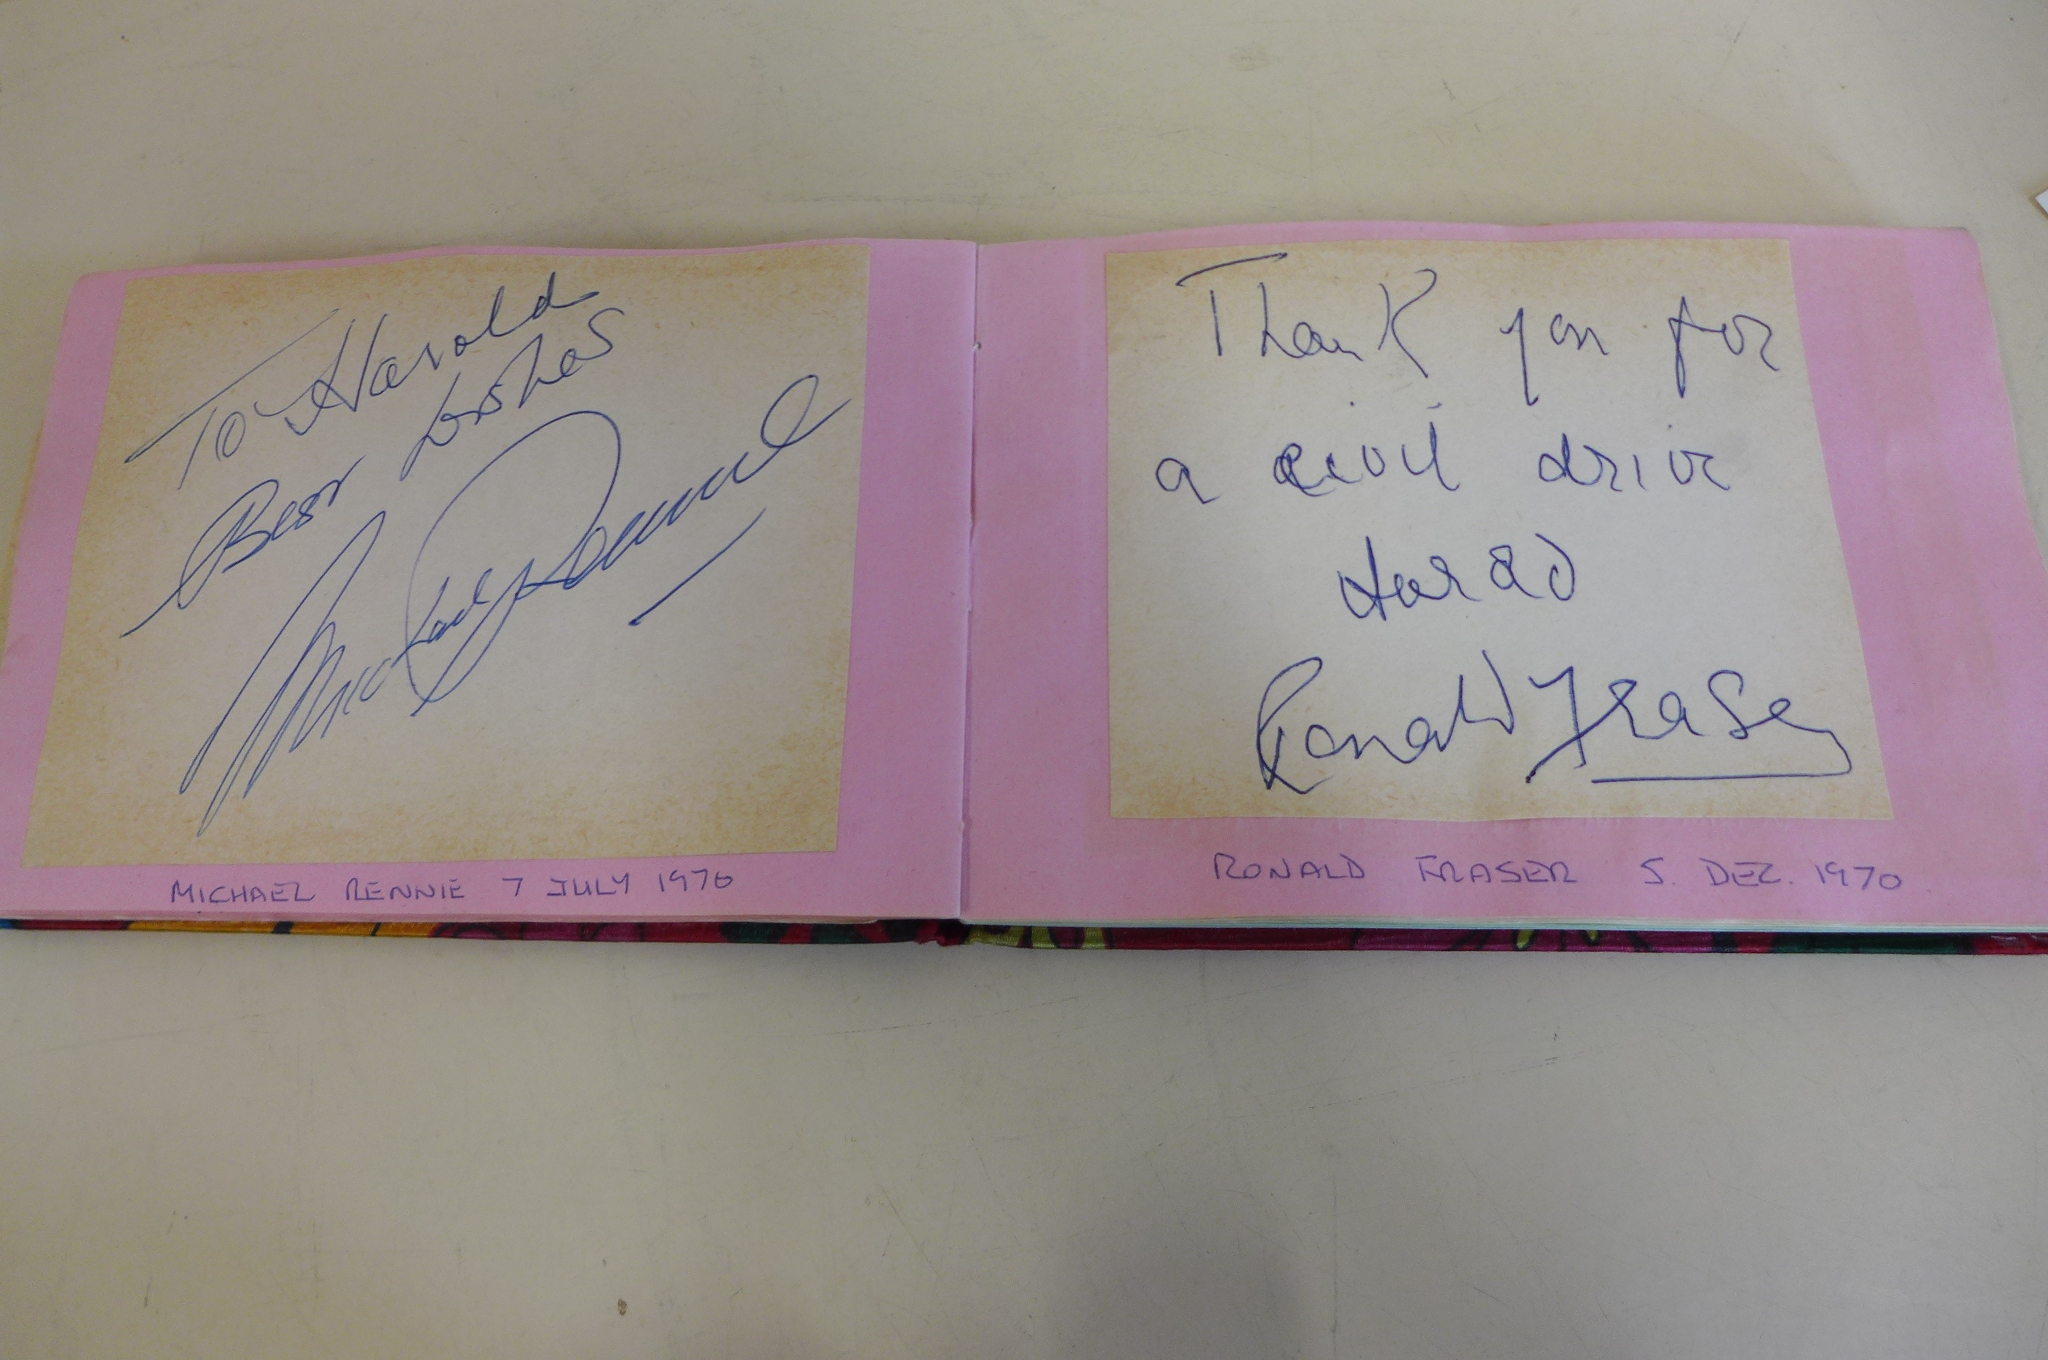 An interesting autograph book with autographs, including Topol, Christopher Lee, Ava Gardner, - Image 5 of 11